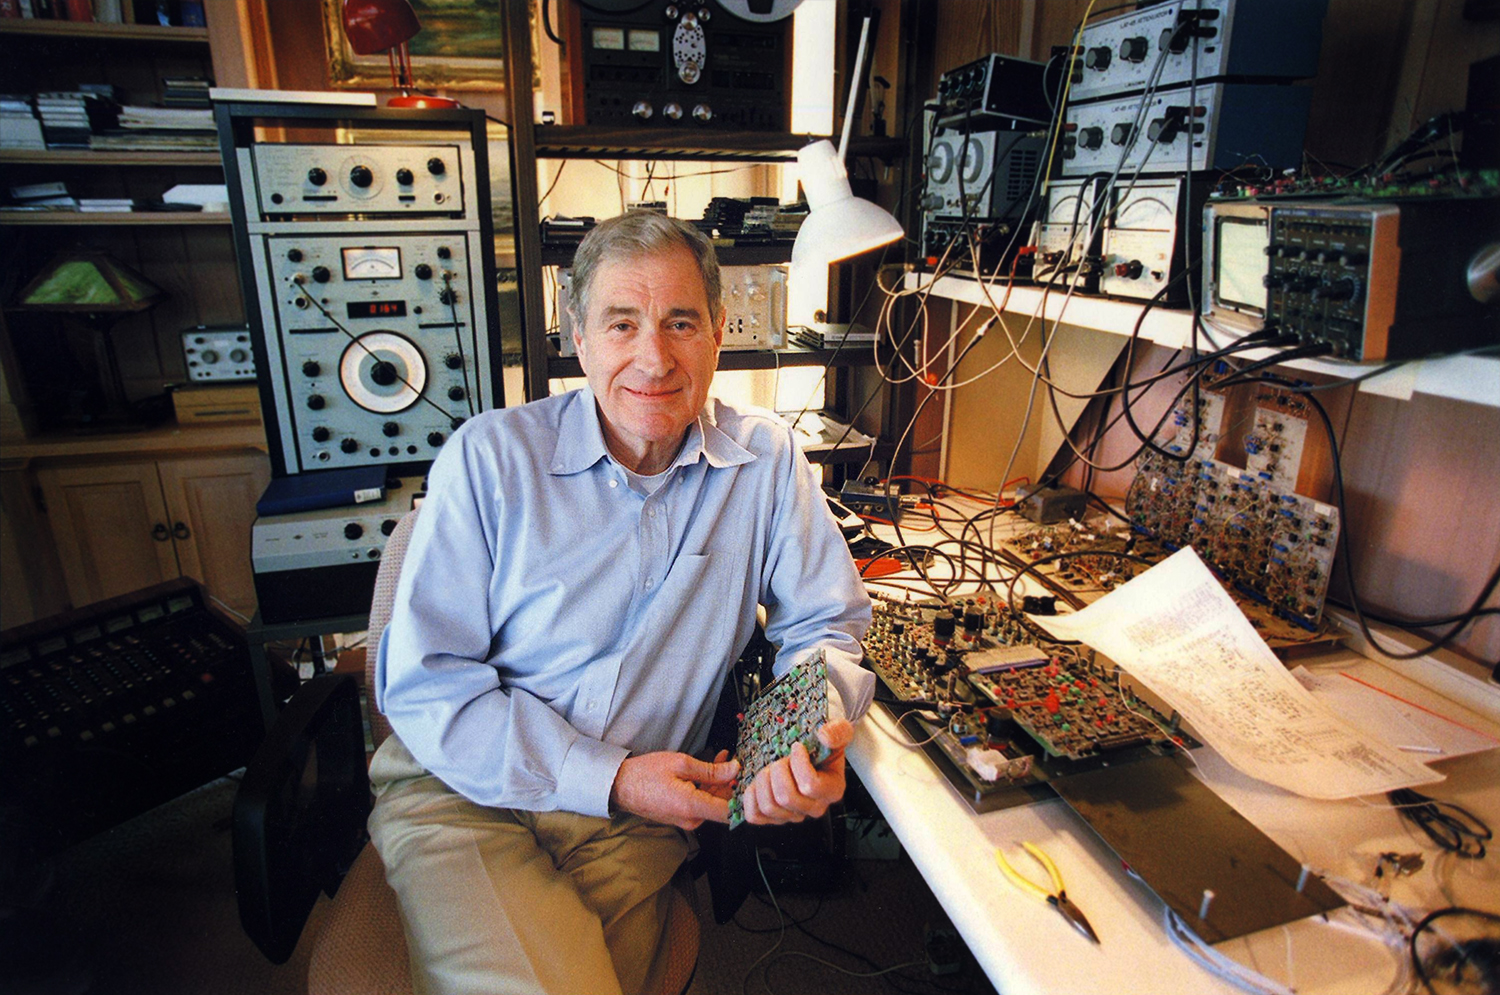 Ray Dolby seated in his workshop holding one of his circuit boards.